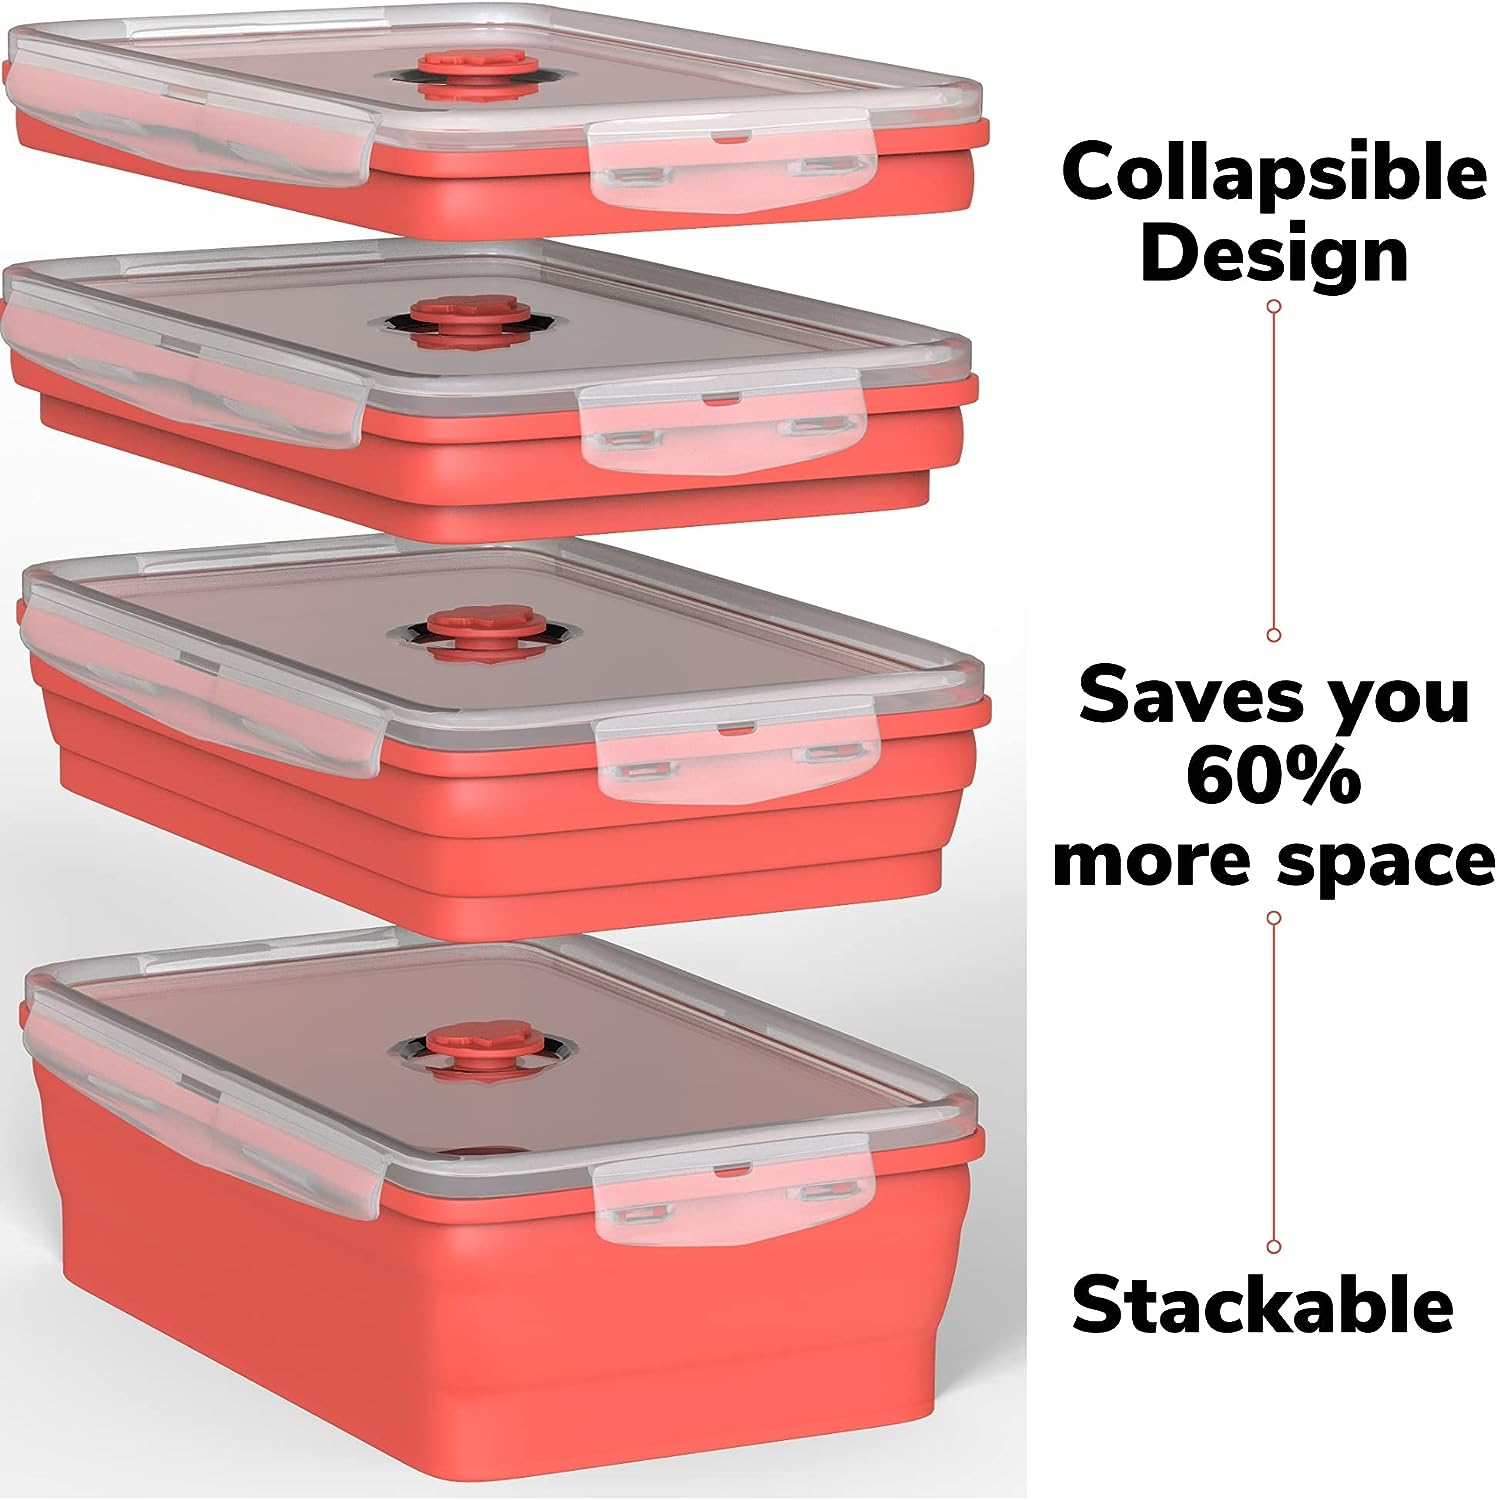 Happon Collapsible Silicone Food Storage Container Set of 3 with